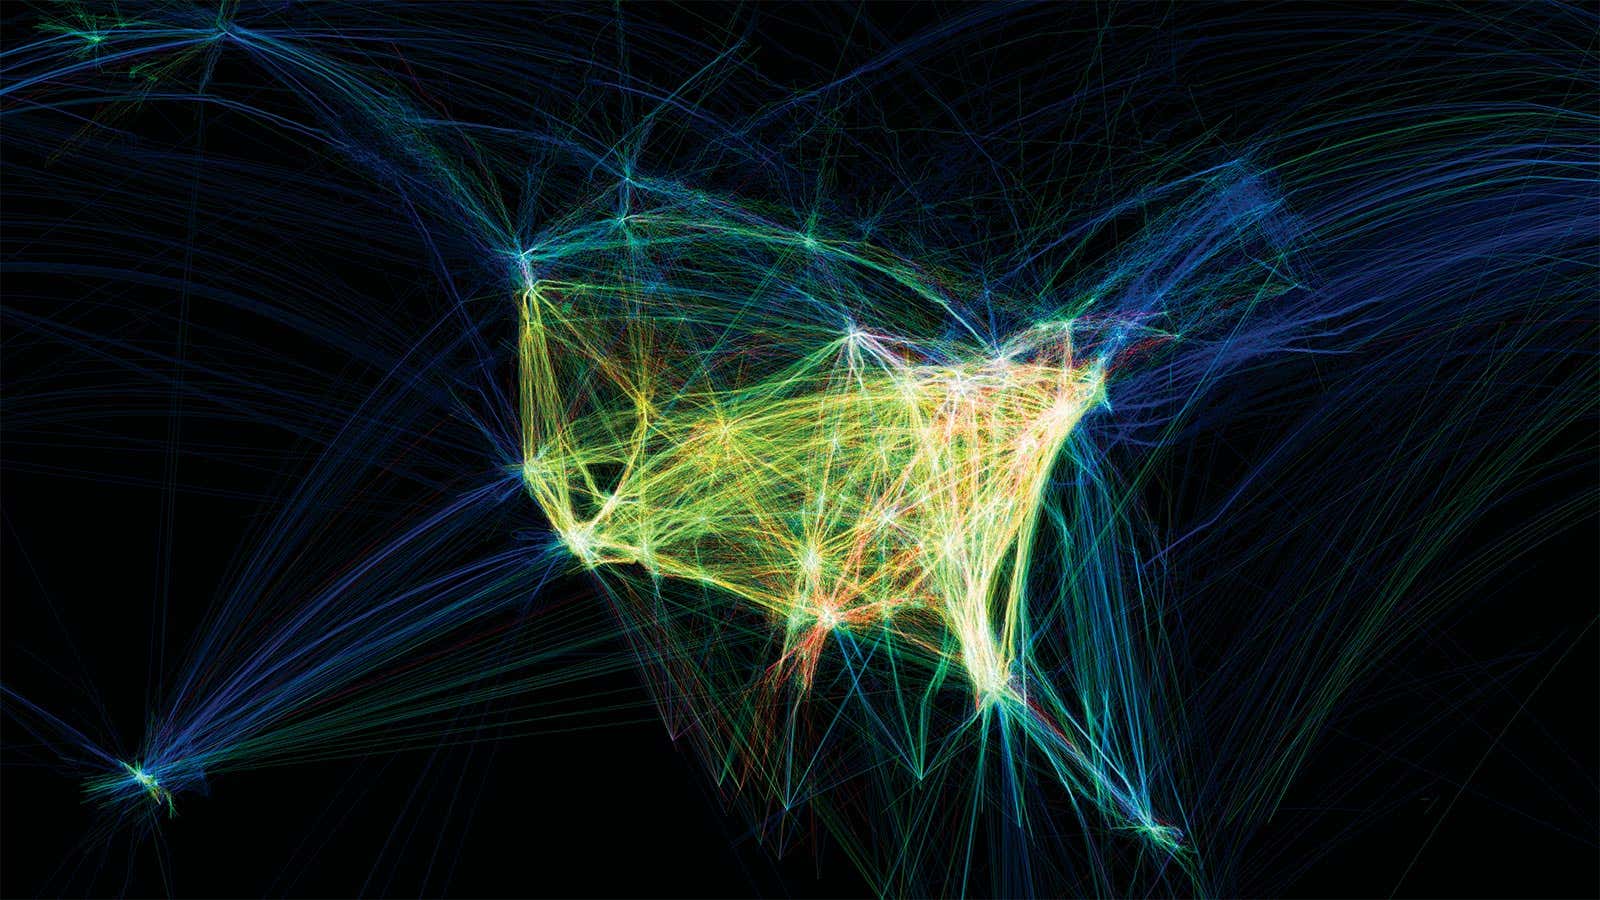 The paths of air traffic over North America visualized.